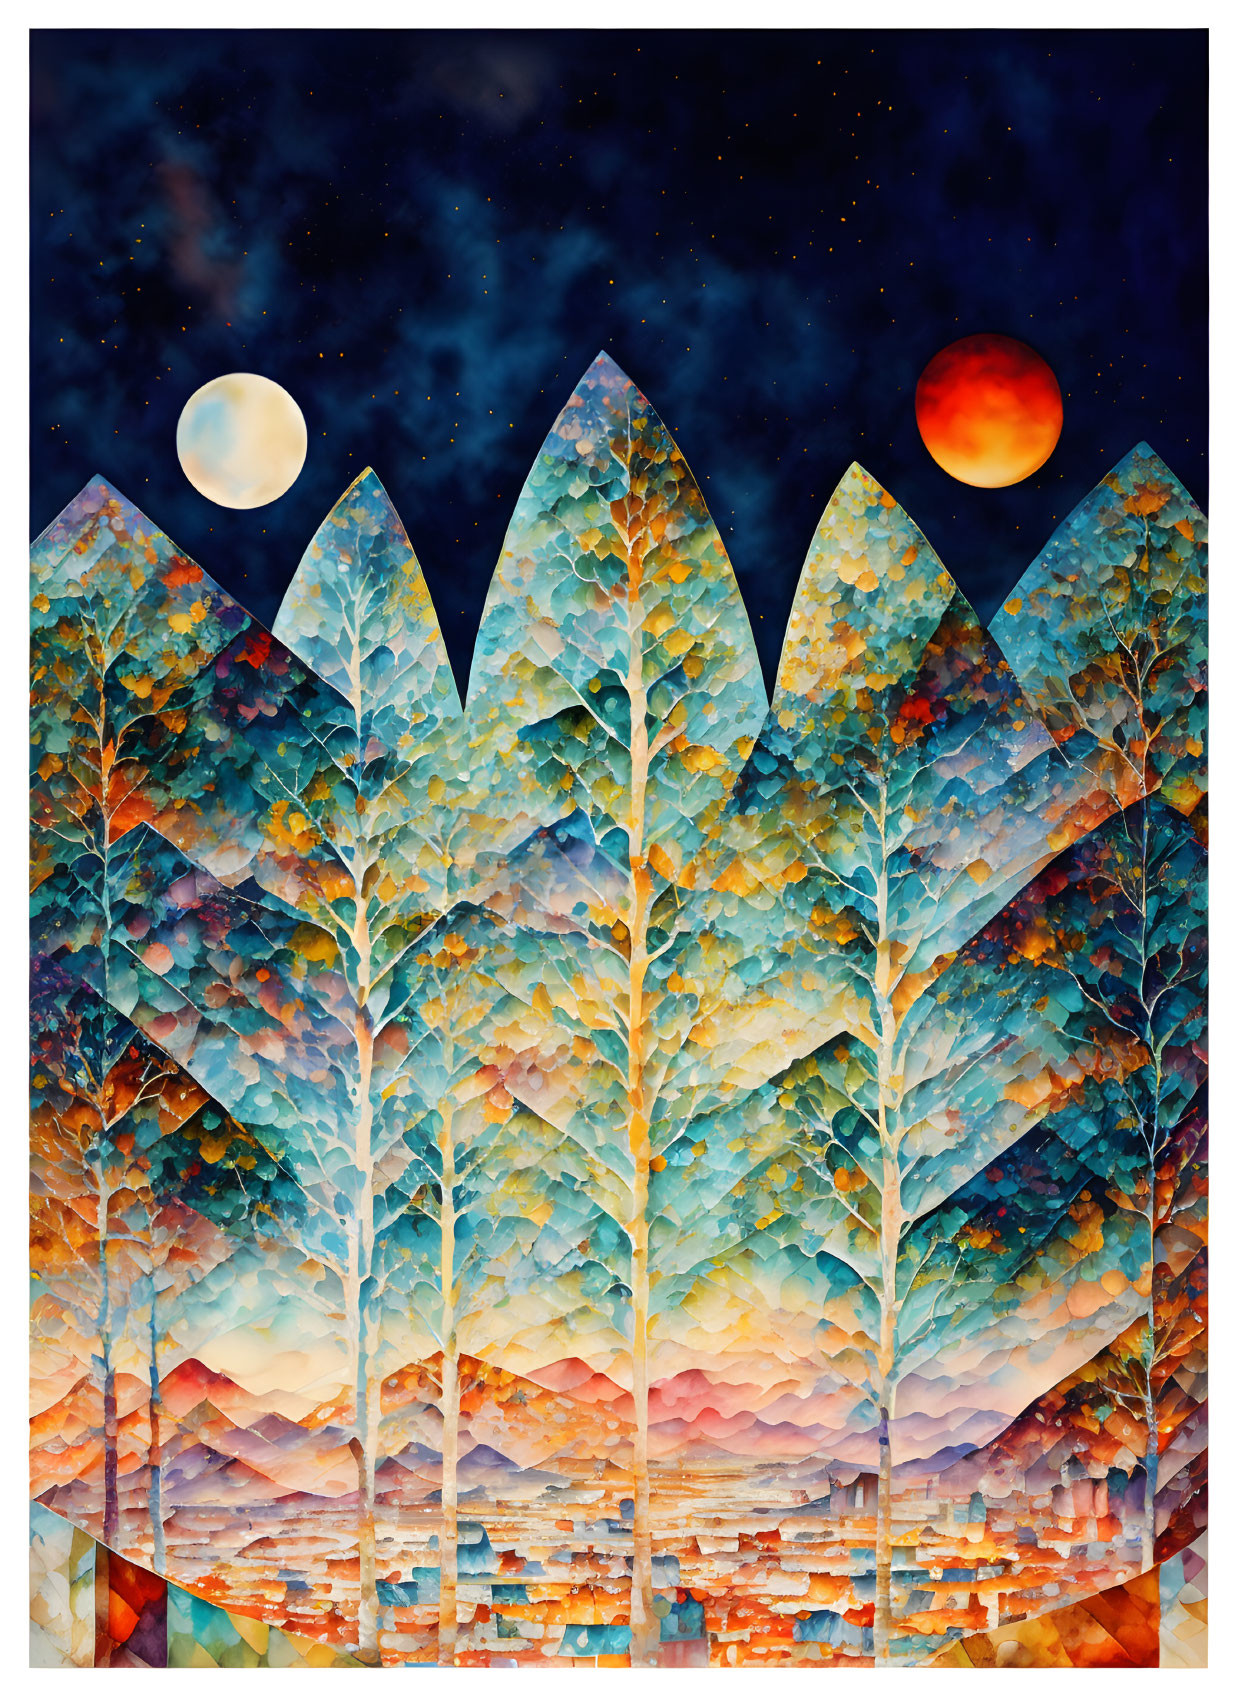 Vibrant forest scene with triangular trees under starlit sky